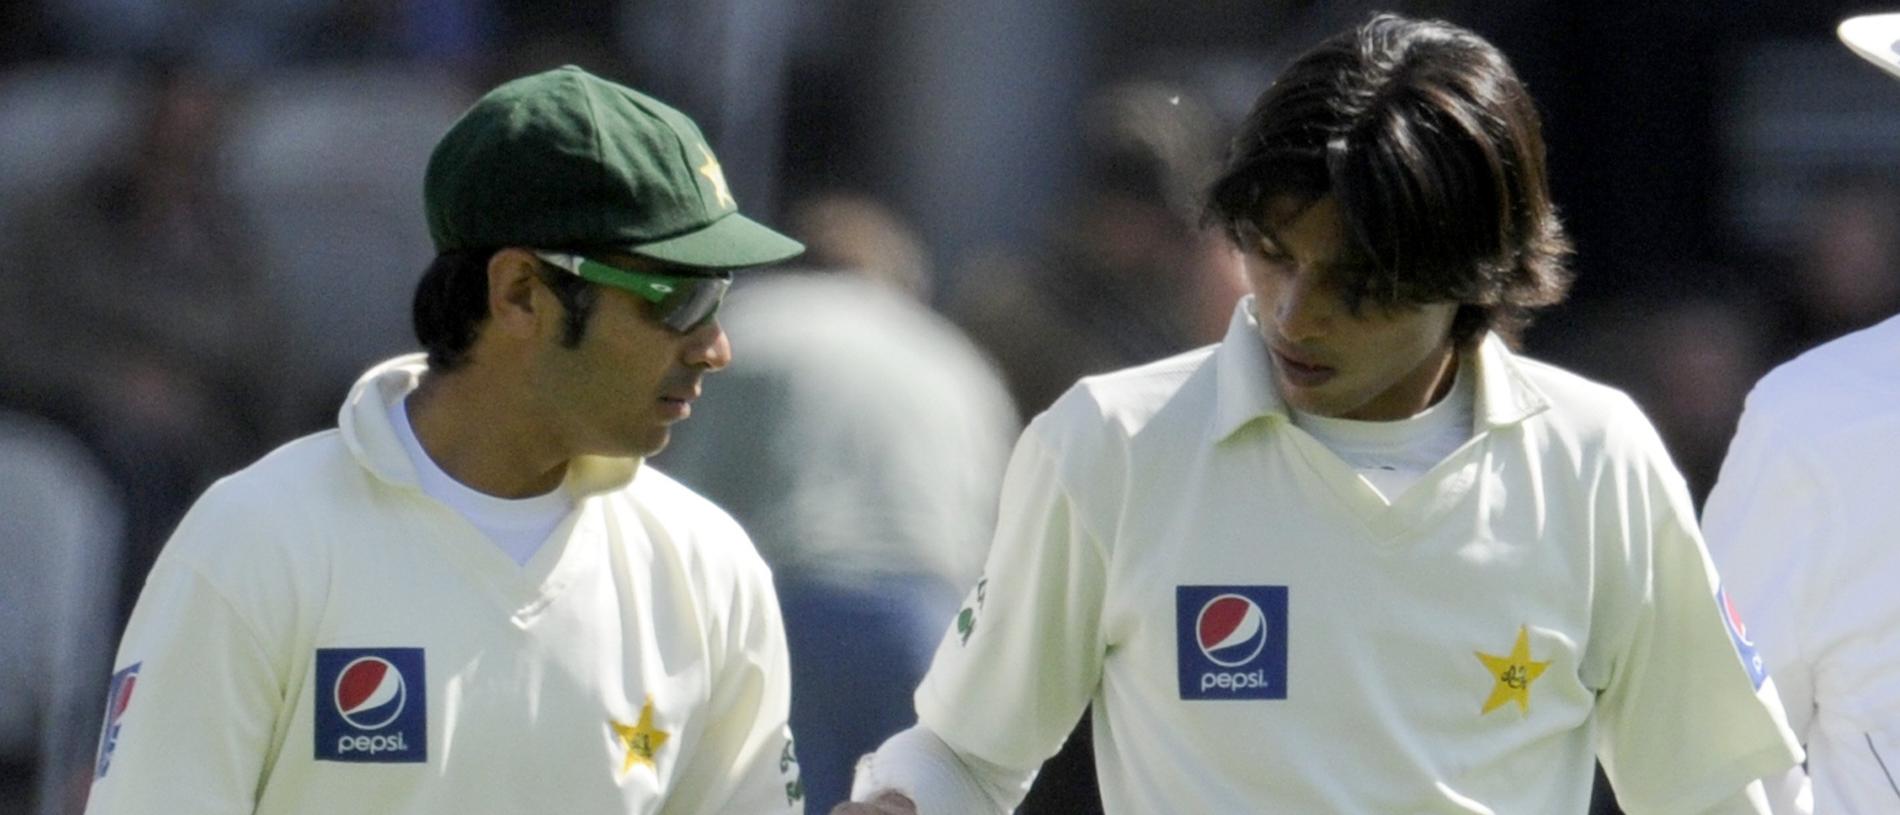 Pakistan's Salman Butt (L) gives the ball to Mohammad Amir during the third day of the fourth cricket test match against England at the Lord's cricket ground, London, 28/08/2010.